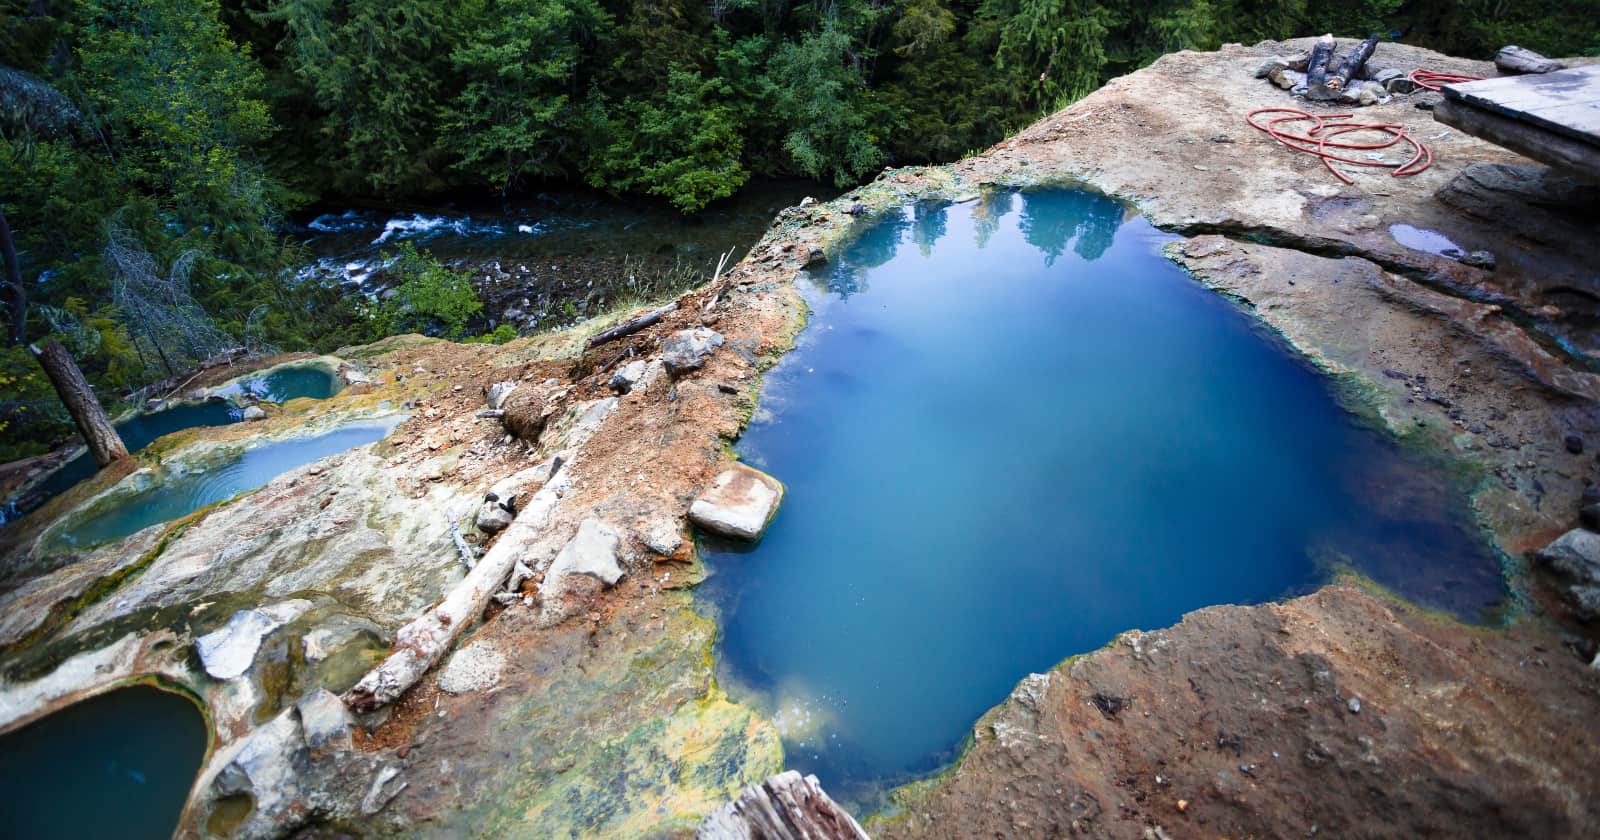 Hot springs along the North Umpqua River, a popular nature destination in the national forest.